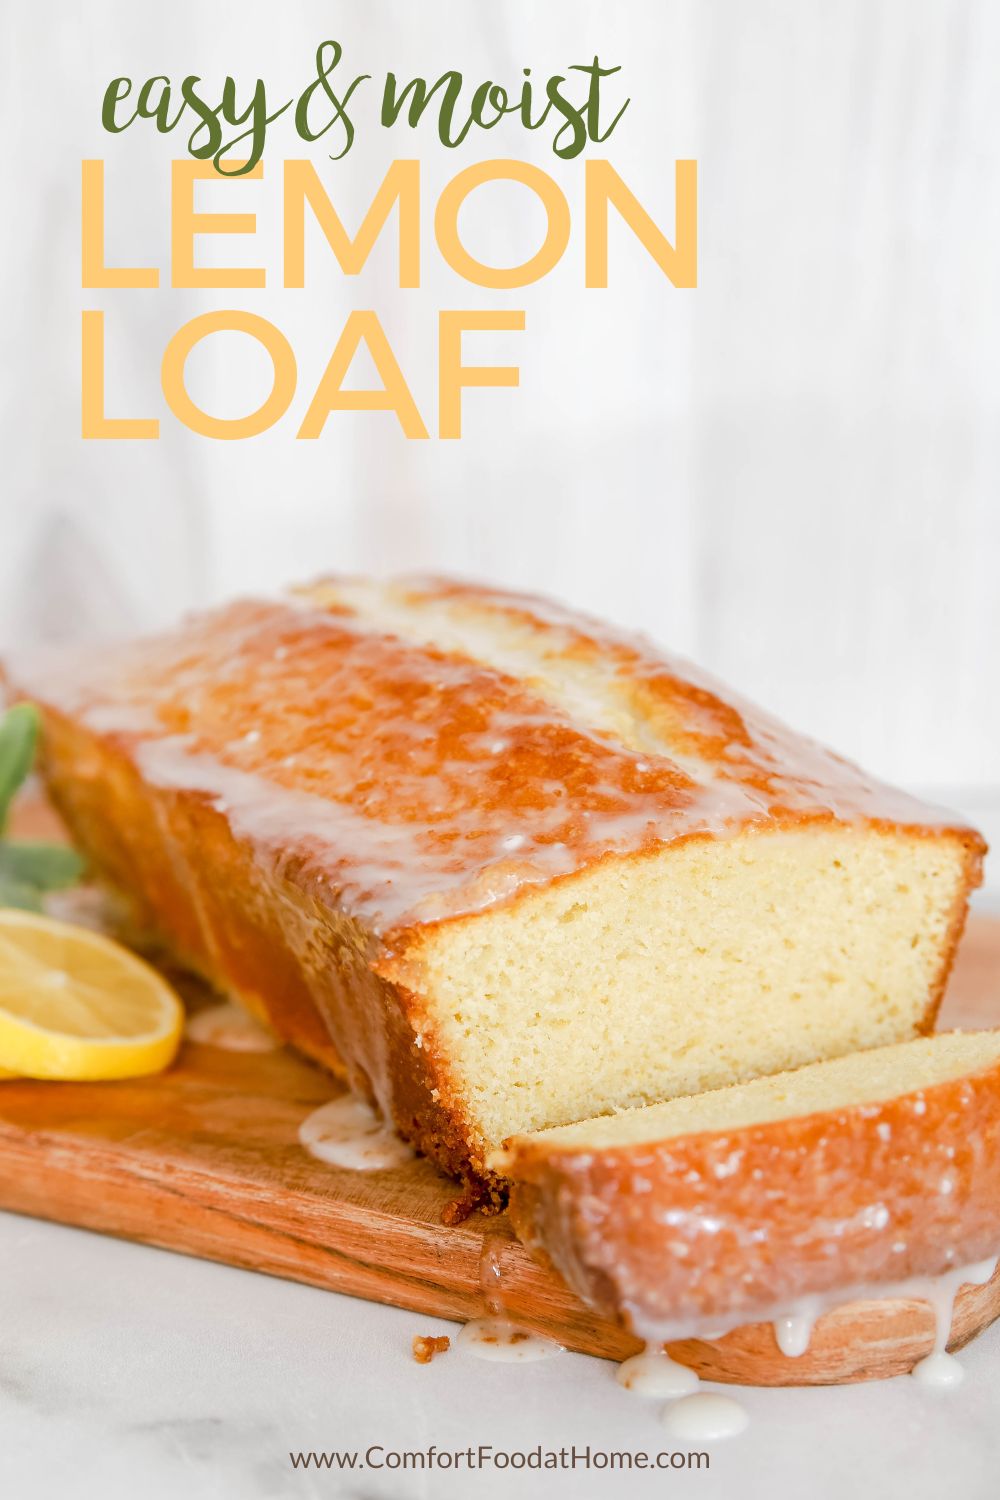 easy and moist Lemon loaf on a wooden board.